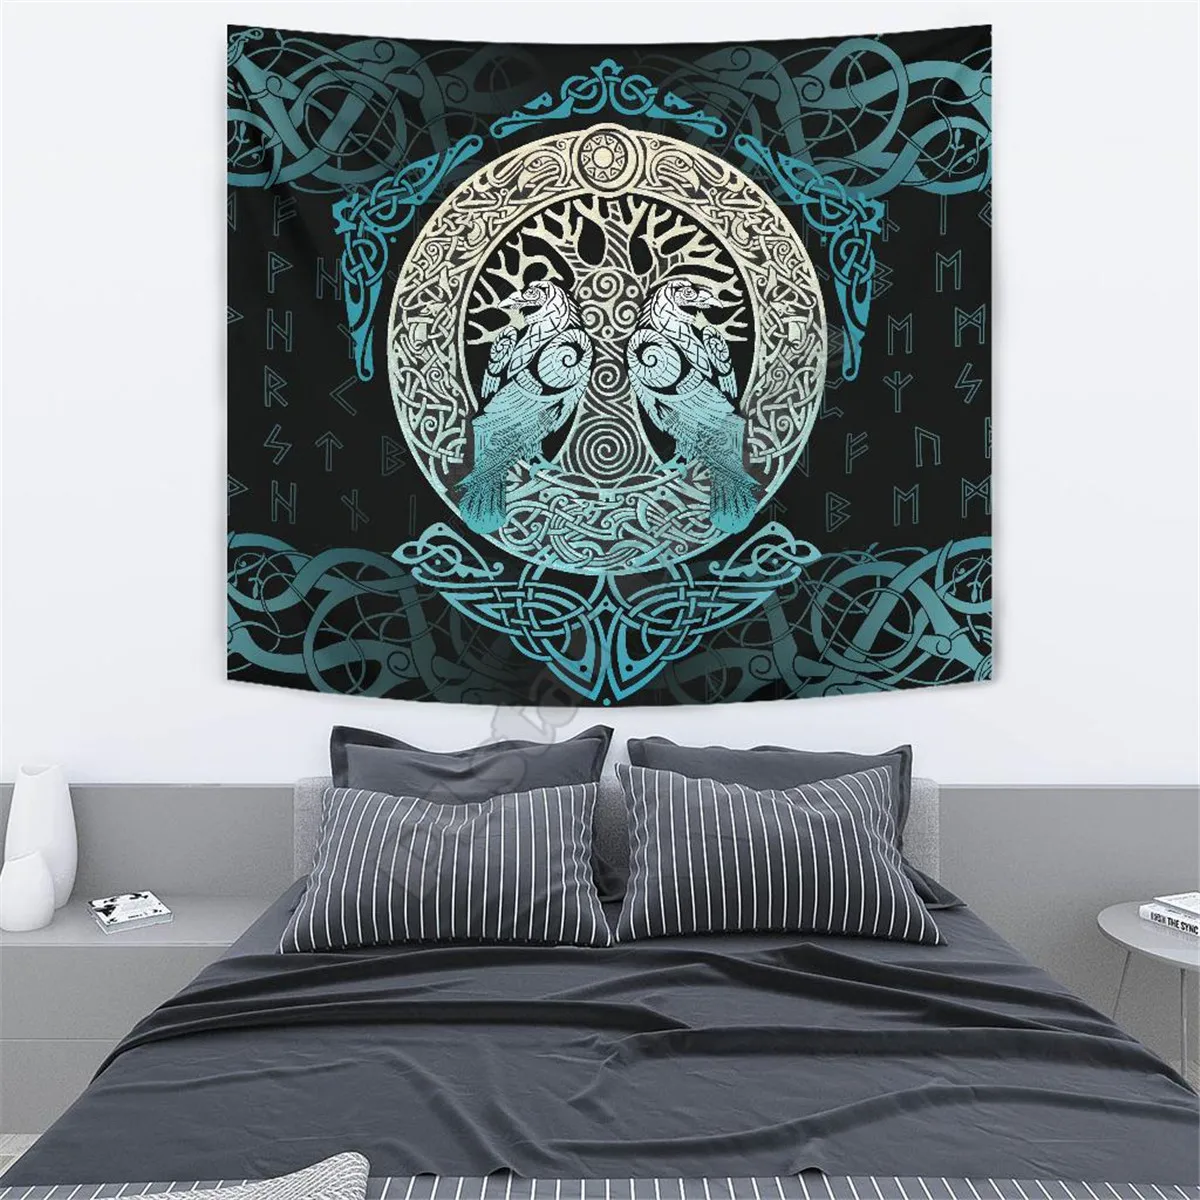 

Viking Style Tapestry Viking Tree Of Life Yggdrasil 3D Printed Wall Tapestry Rectangular Home Decor Wall Hanging Home Decoration